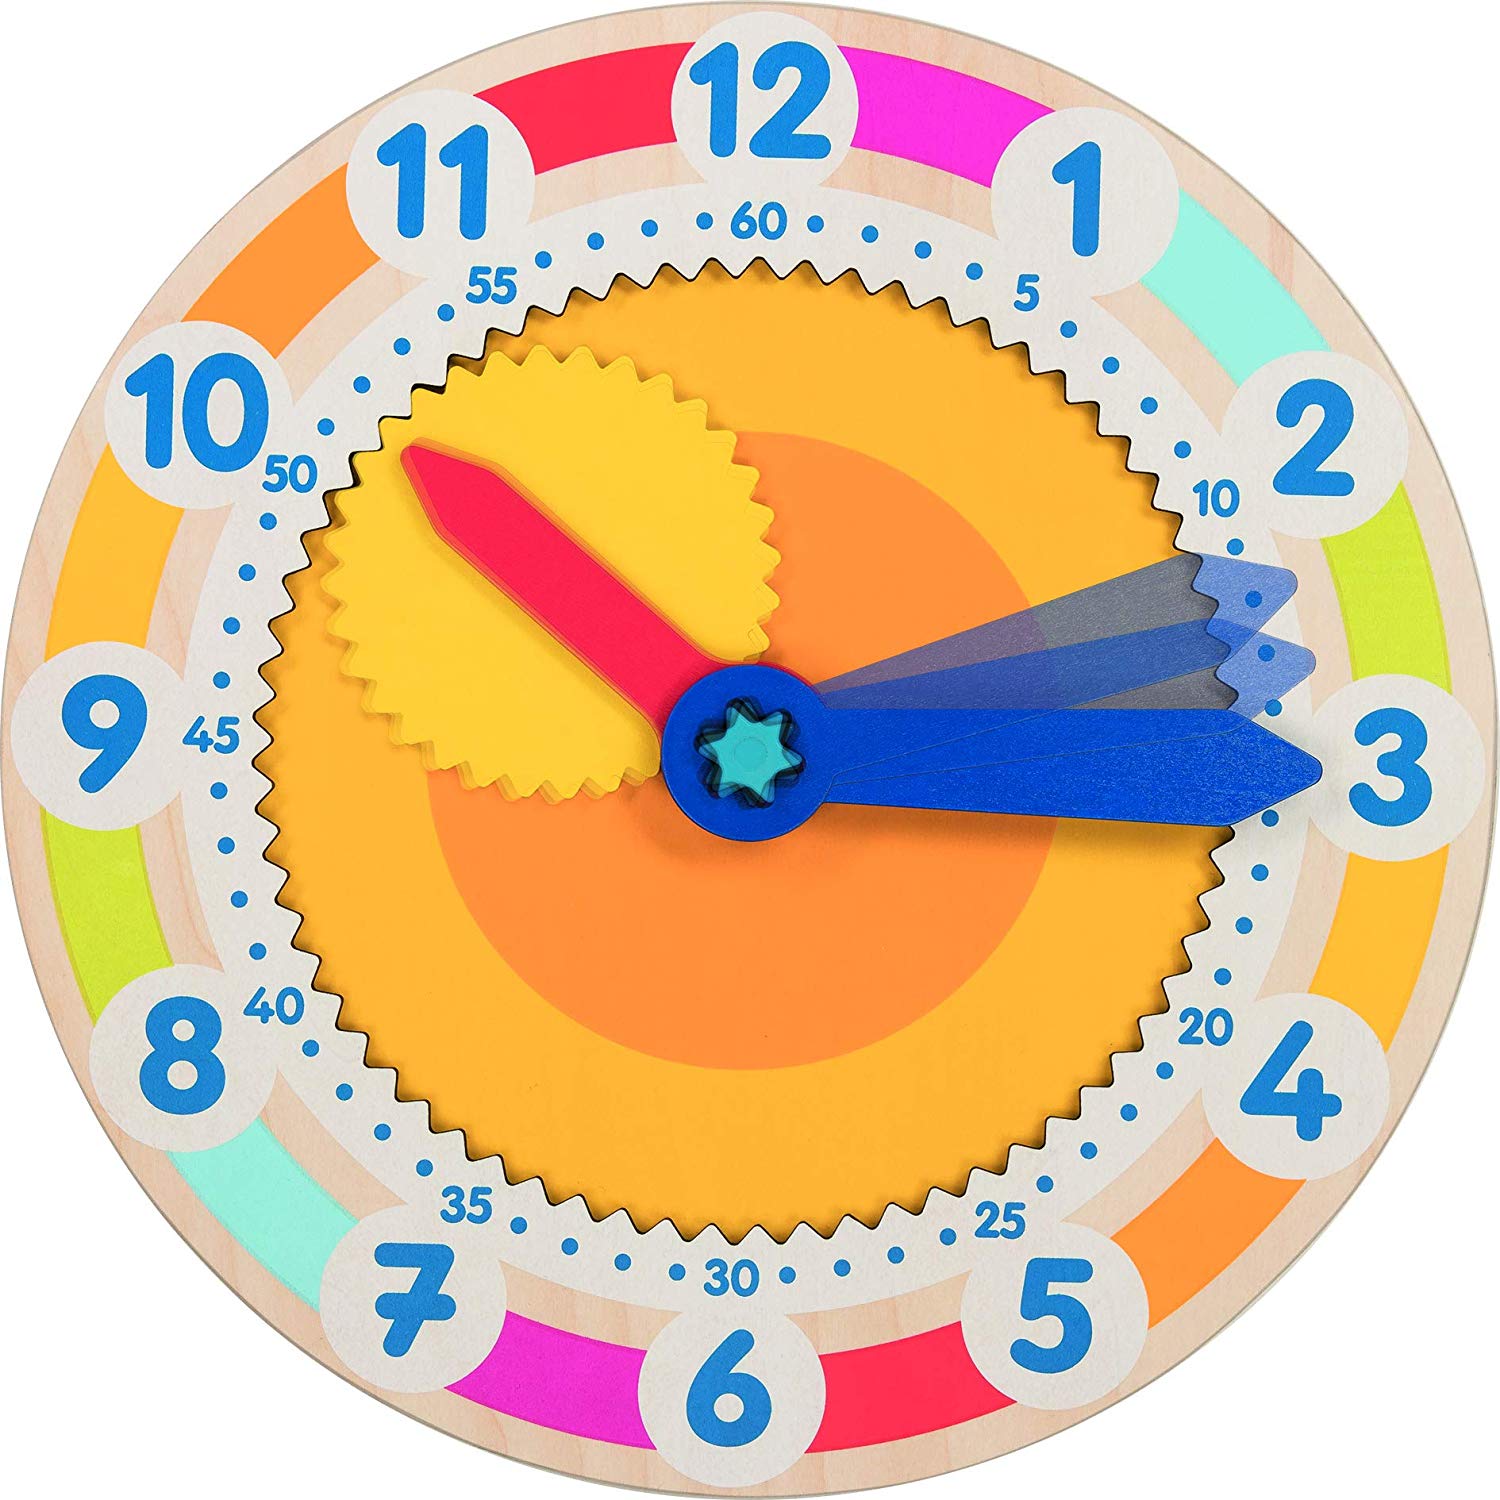 Goki Activity And Reflection Games Learning Games, Gokirx, Learn The Time, 